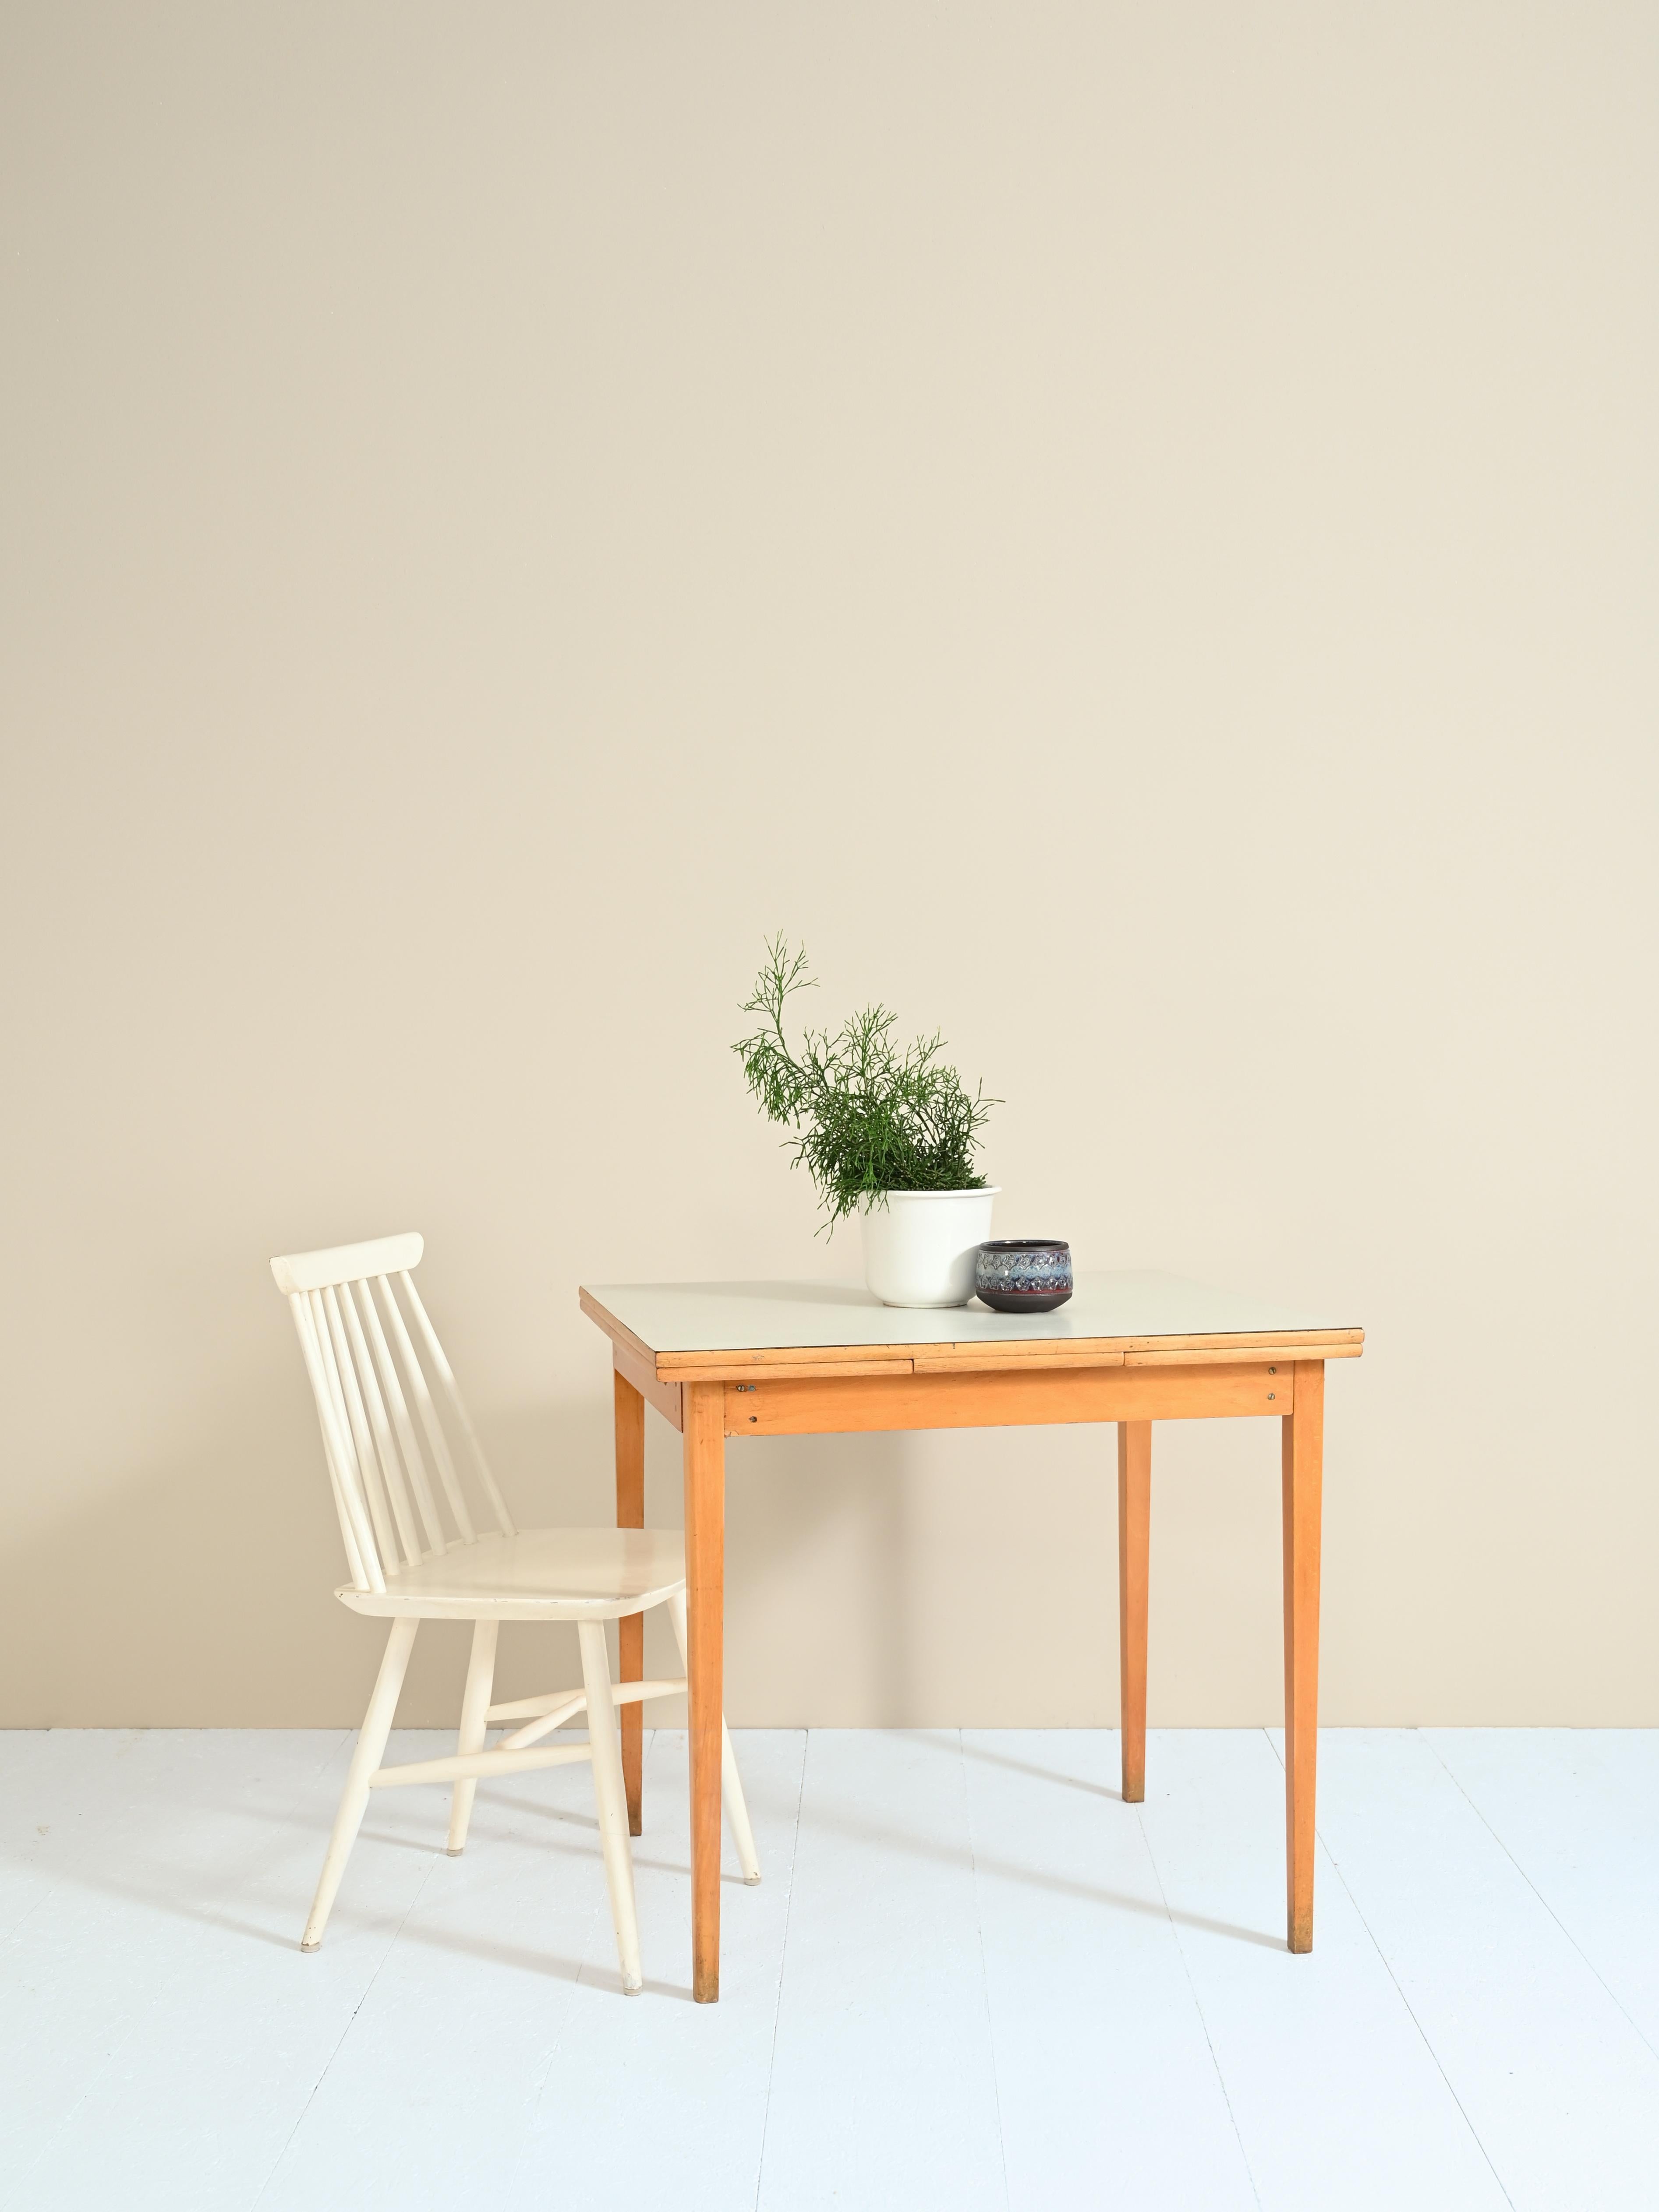 Square table with wood and laminate wings manufactured in Sweden in the 1960s/70s .

Because of its small size, it is perfect for placing in small rooms.

The table is 80 cm long.
The table with open wings is 137 cm long (80cm+Wing 28cm+Wing